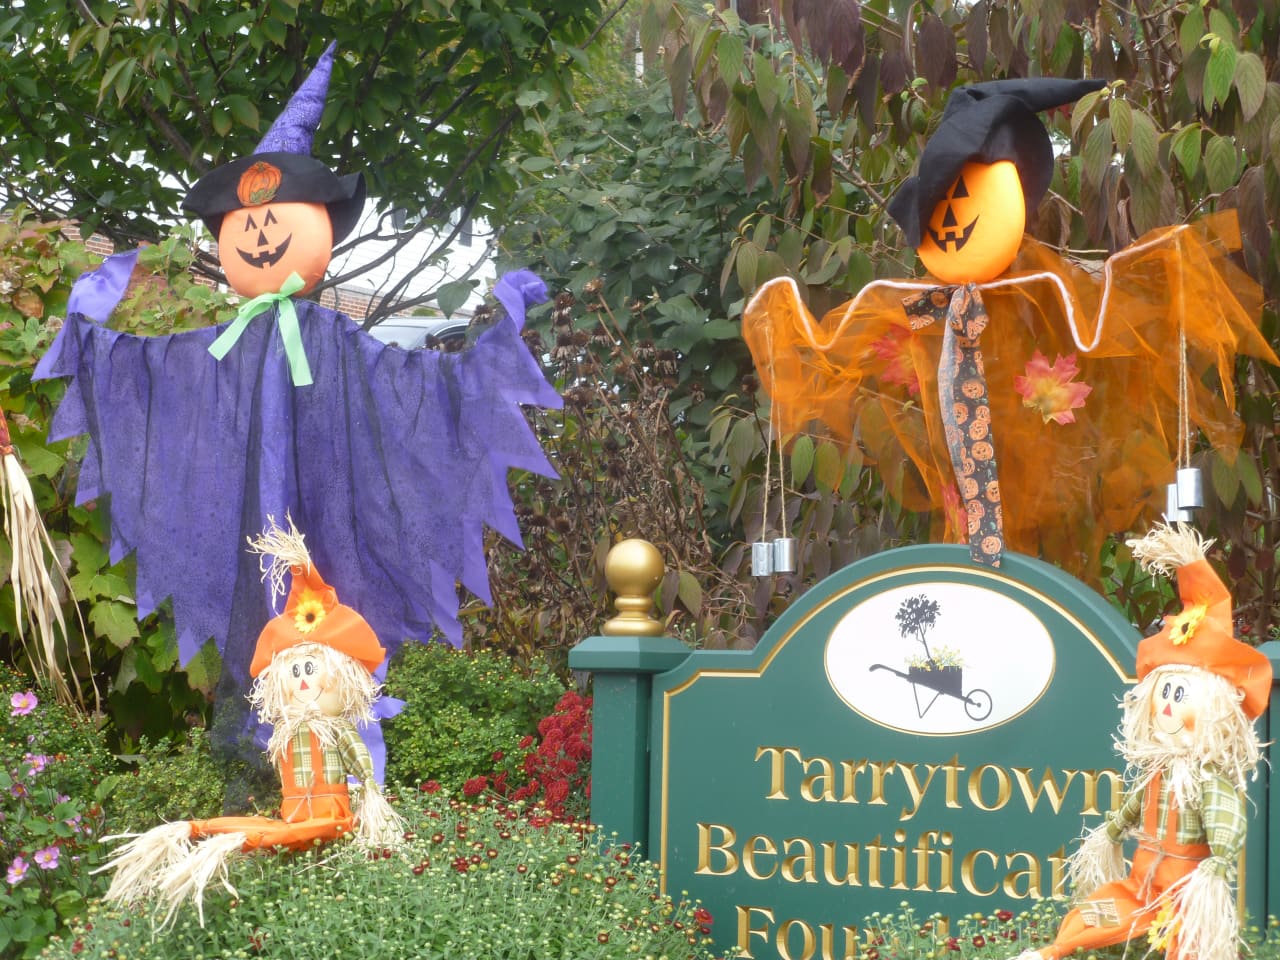 The Tarrytown Beautification Foundation is housing goblins in time for Halloween in the villages.